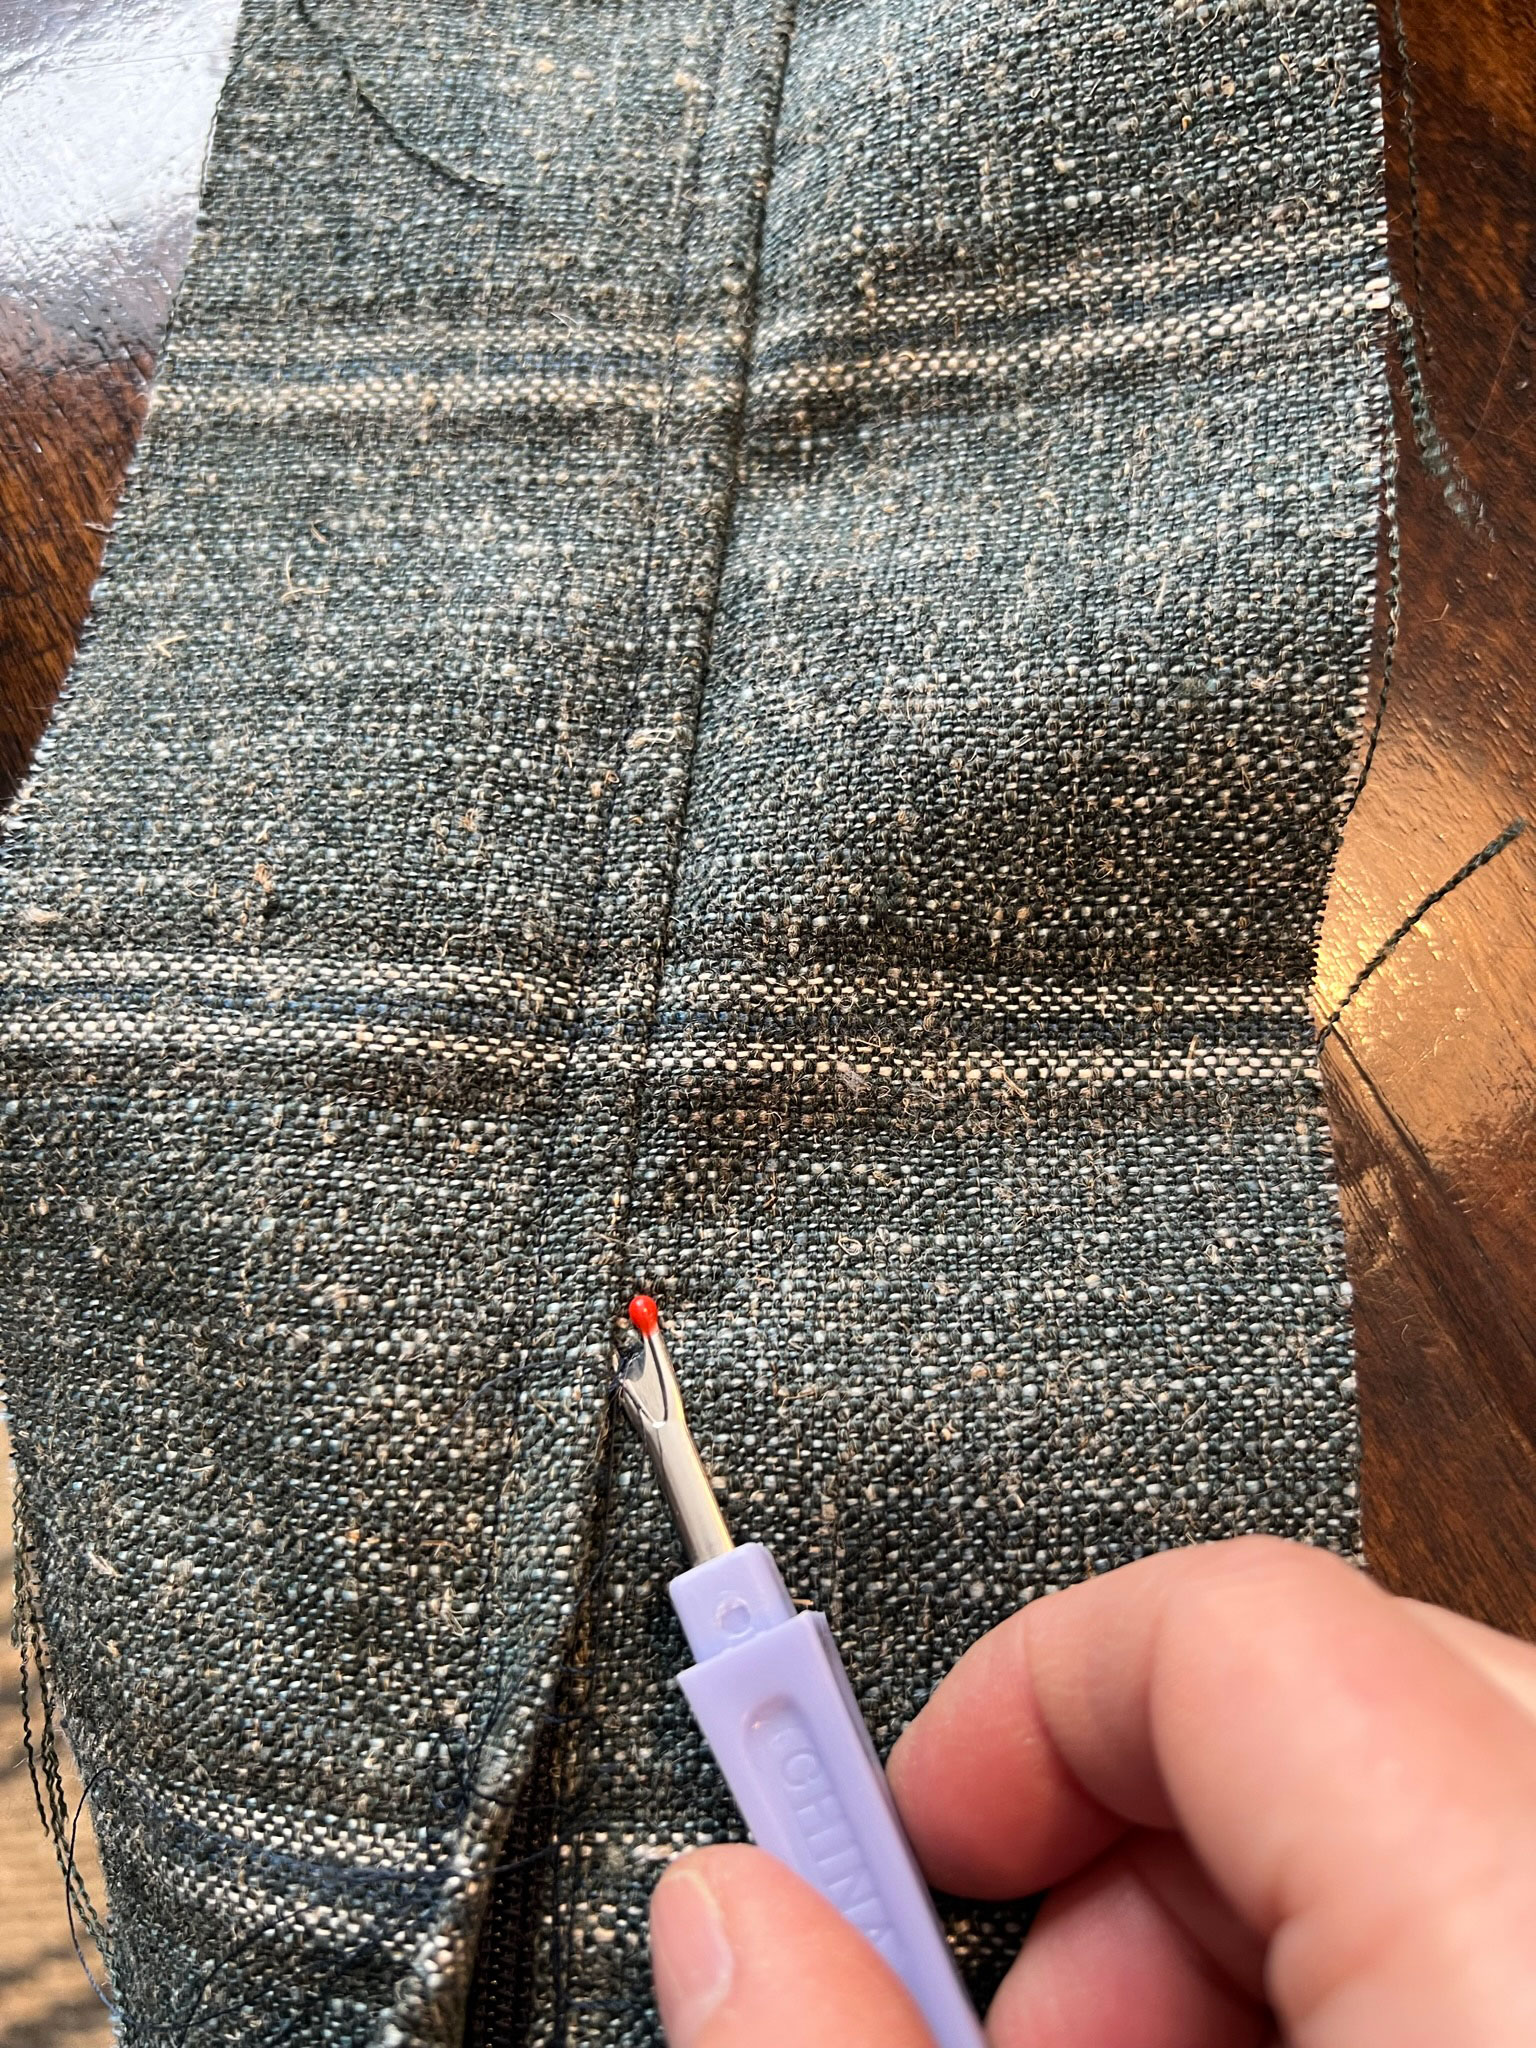 Using a seam ripper to remove a stitch on flap of fabric